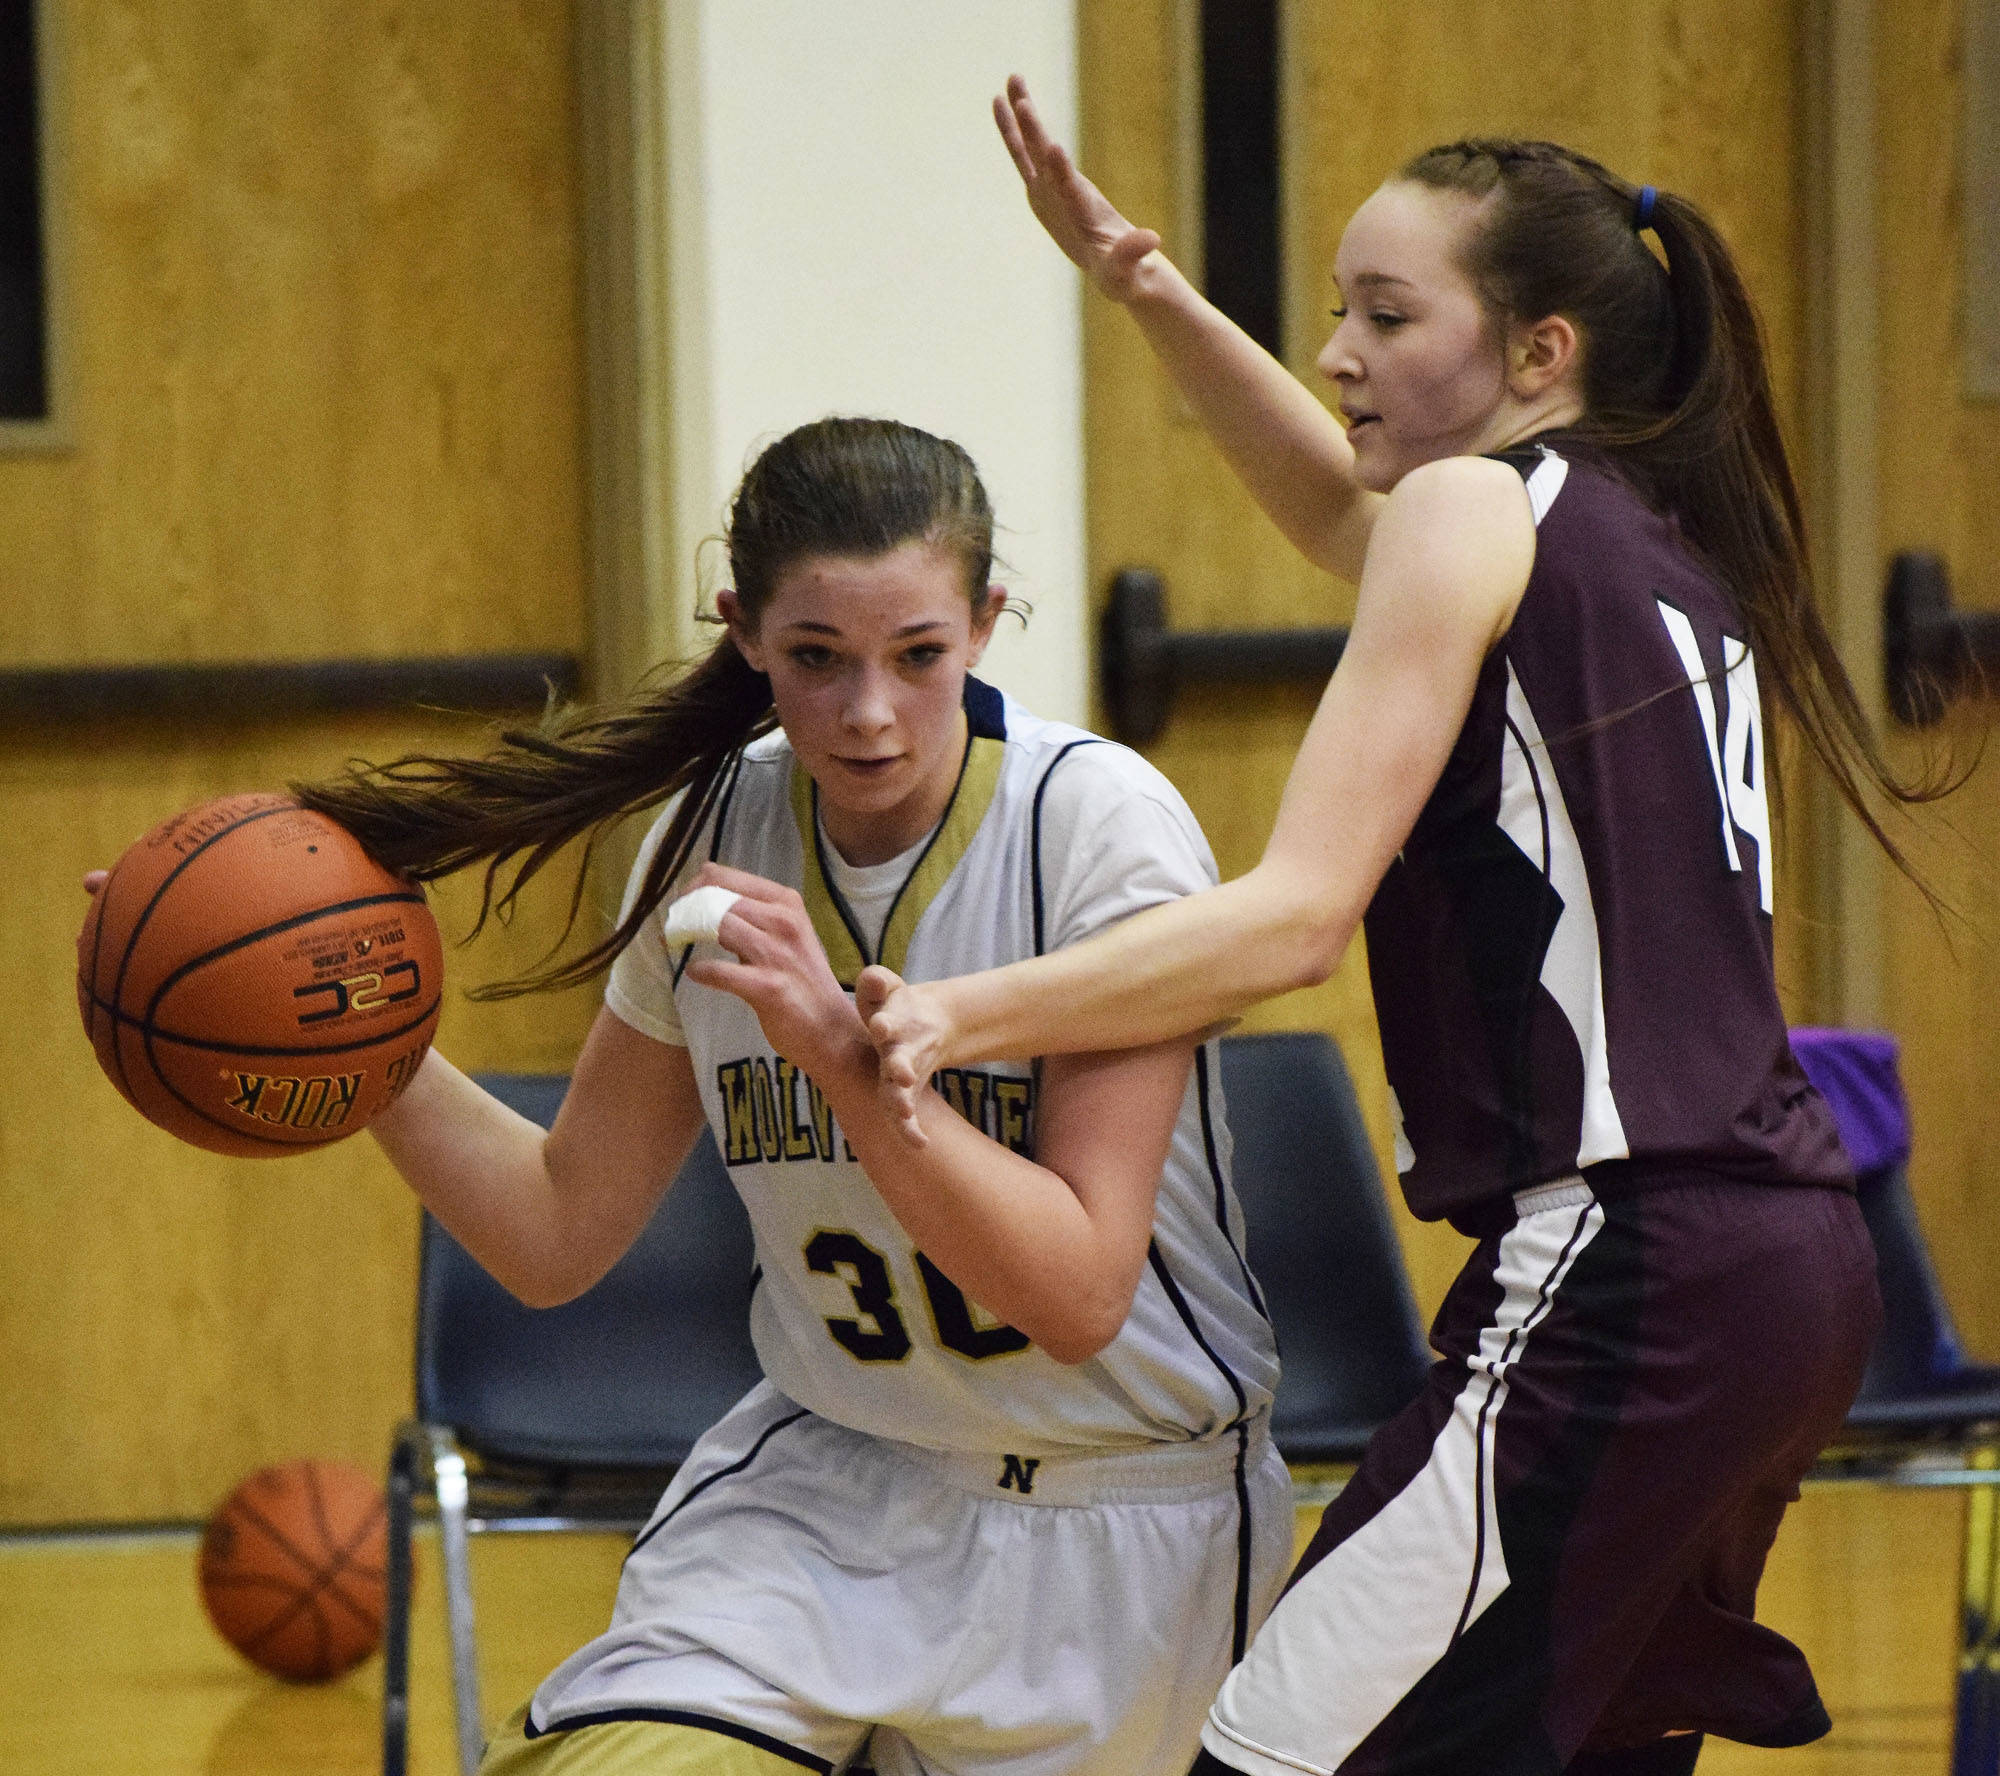 Ninilchik’s DeeAnn White (left) looks for space against Nikolaevsk’s Elizabeth Fefelov in the second half of the Peninsula Conference girls championship game at Homer High School on March 3, 2017. (Photo by Joey Klecka/Peninsula Clarion)